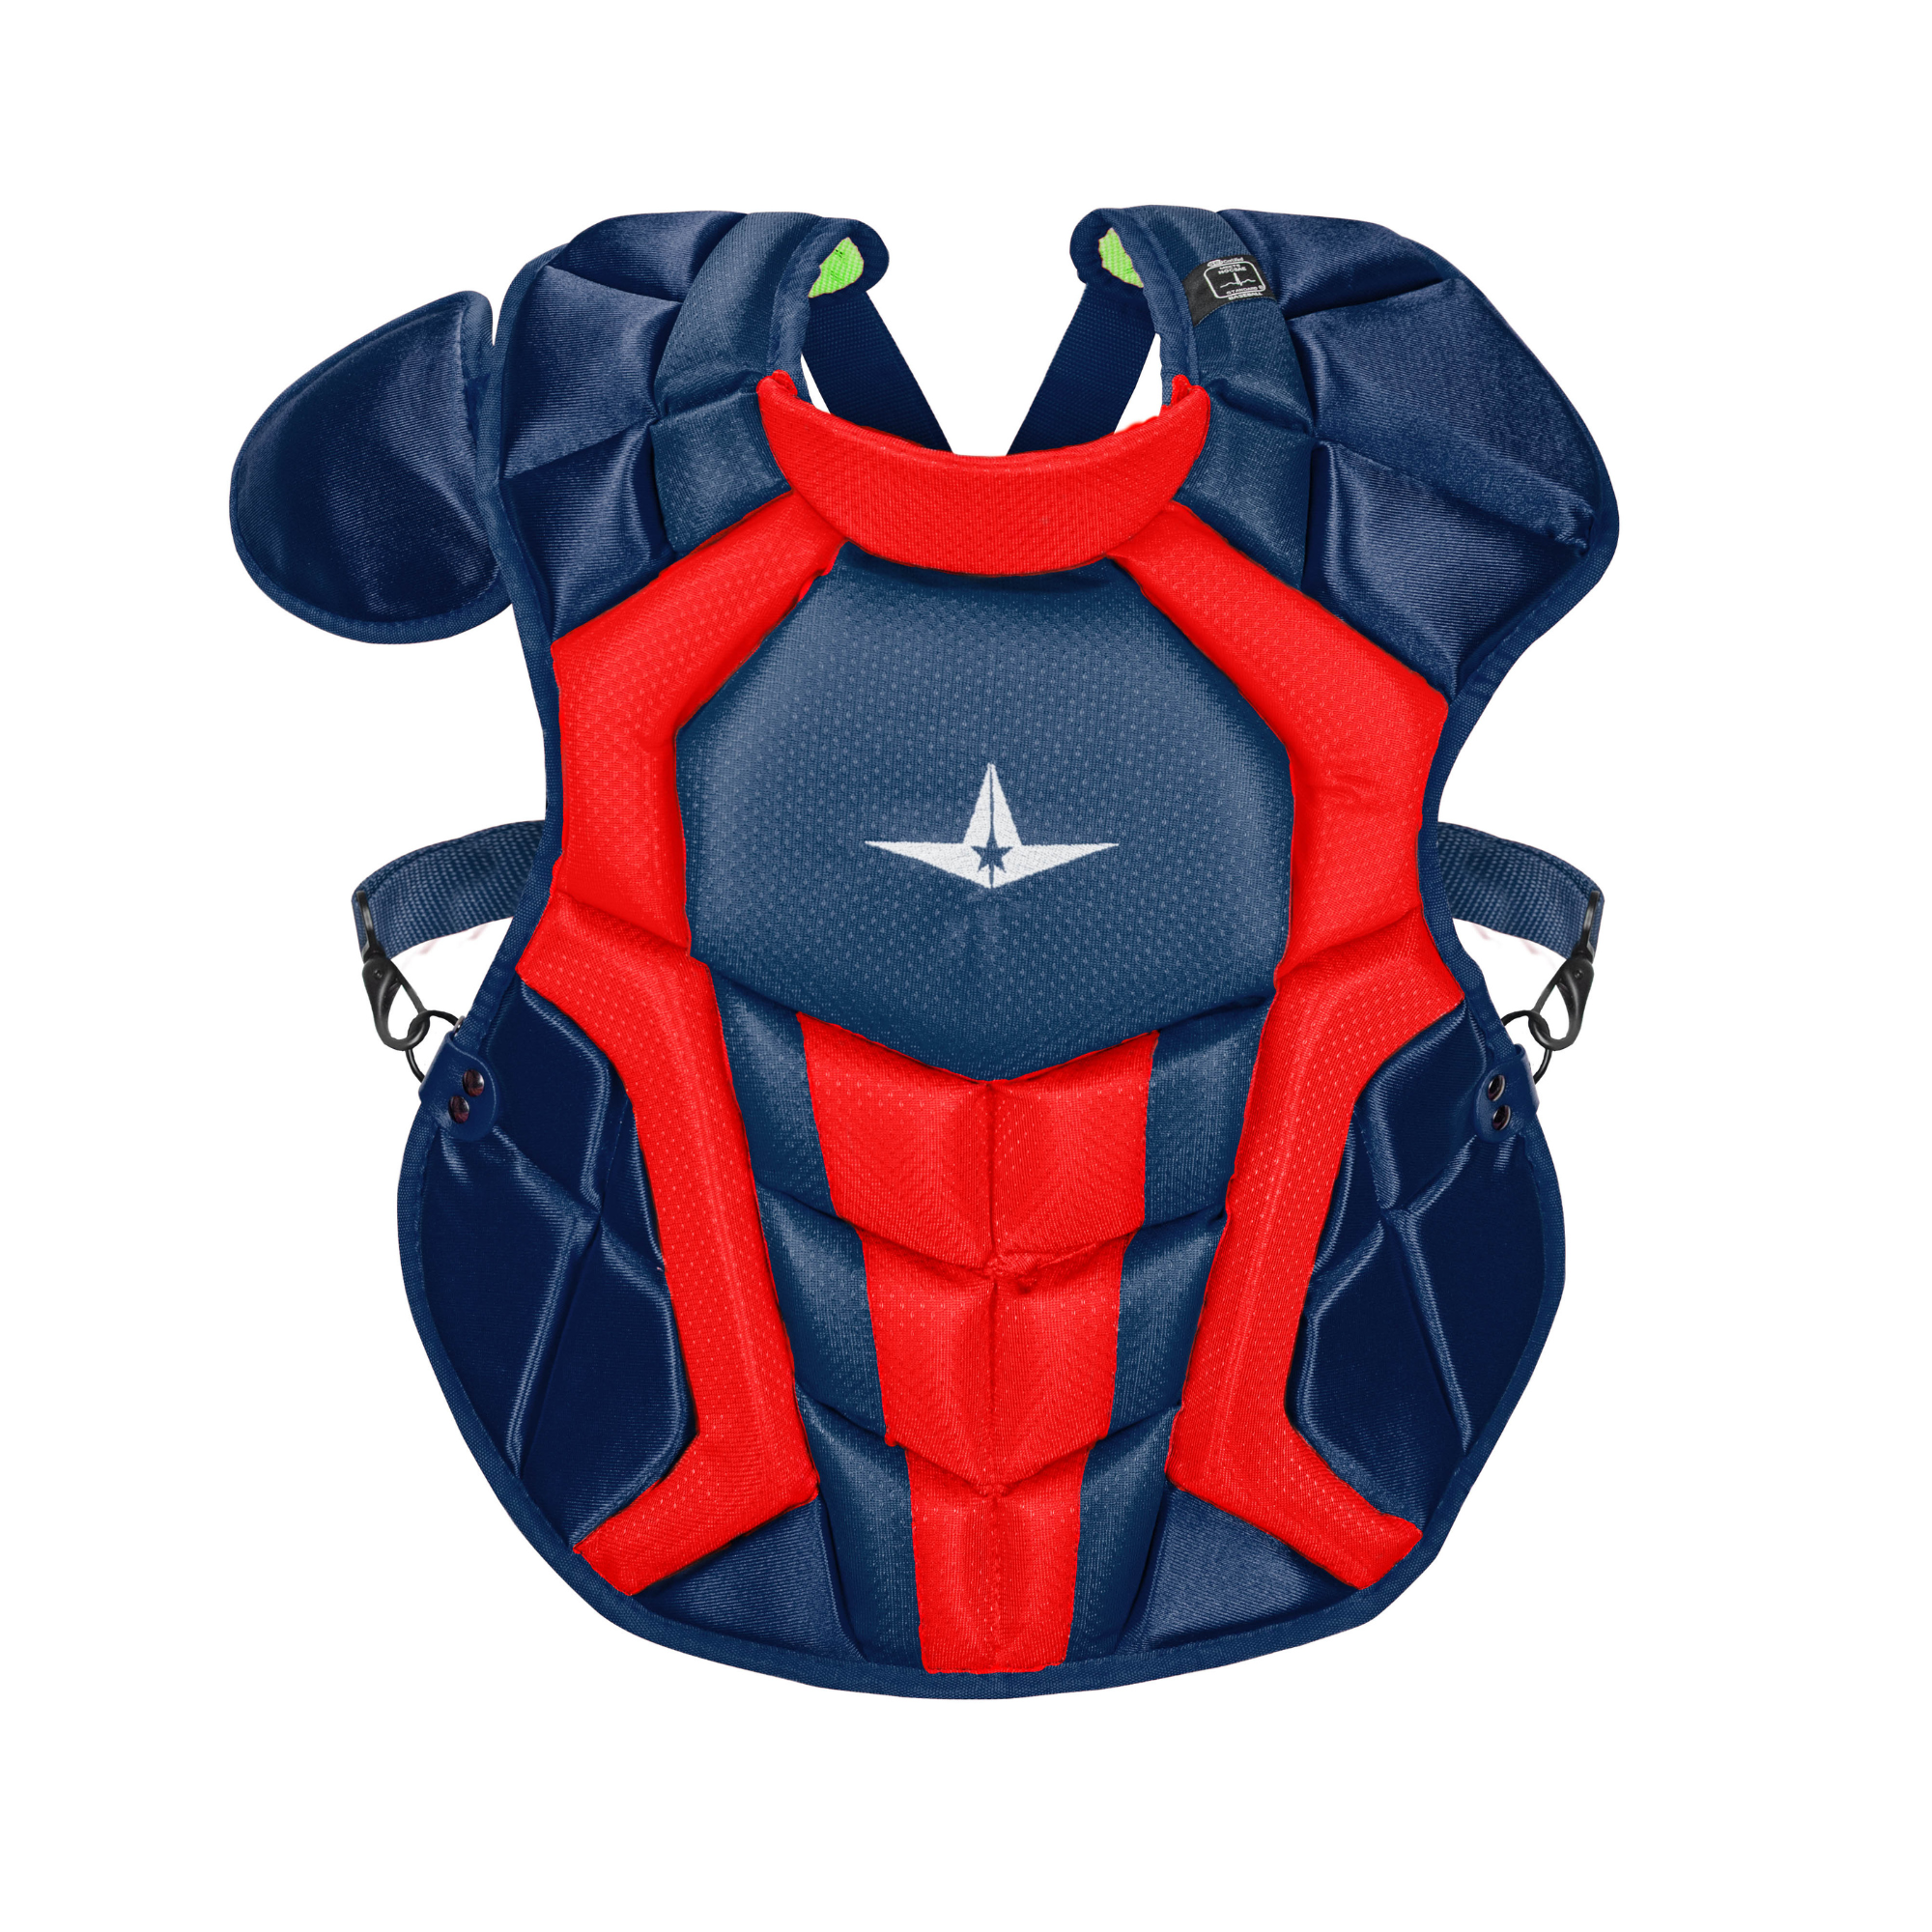 All-Star S7 AXIS Chest Protector/ Two Tone Ages 9-12